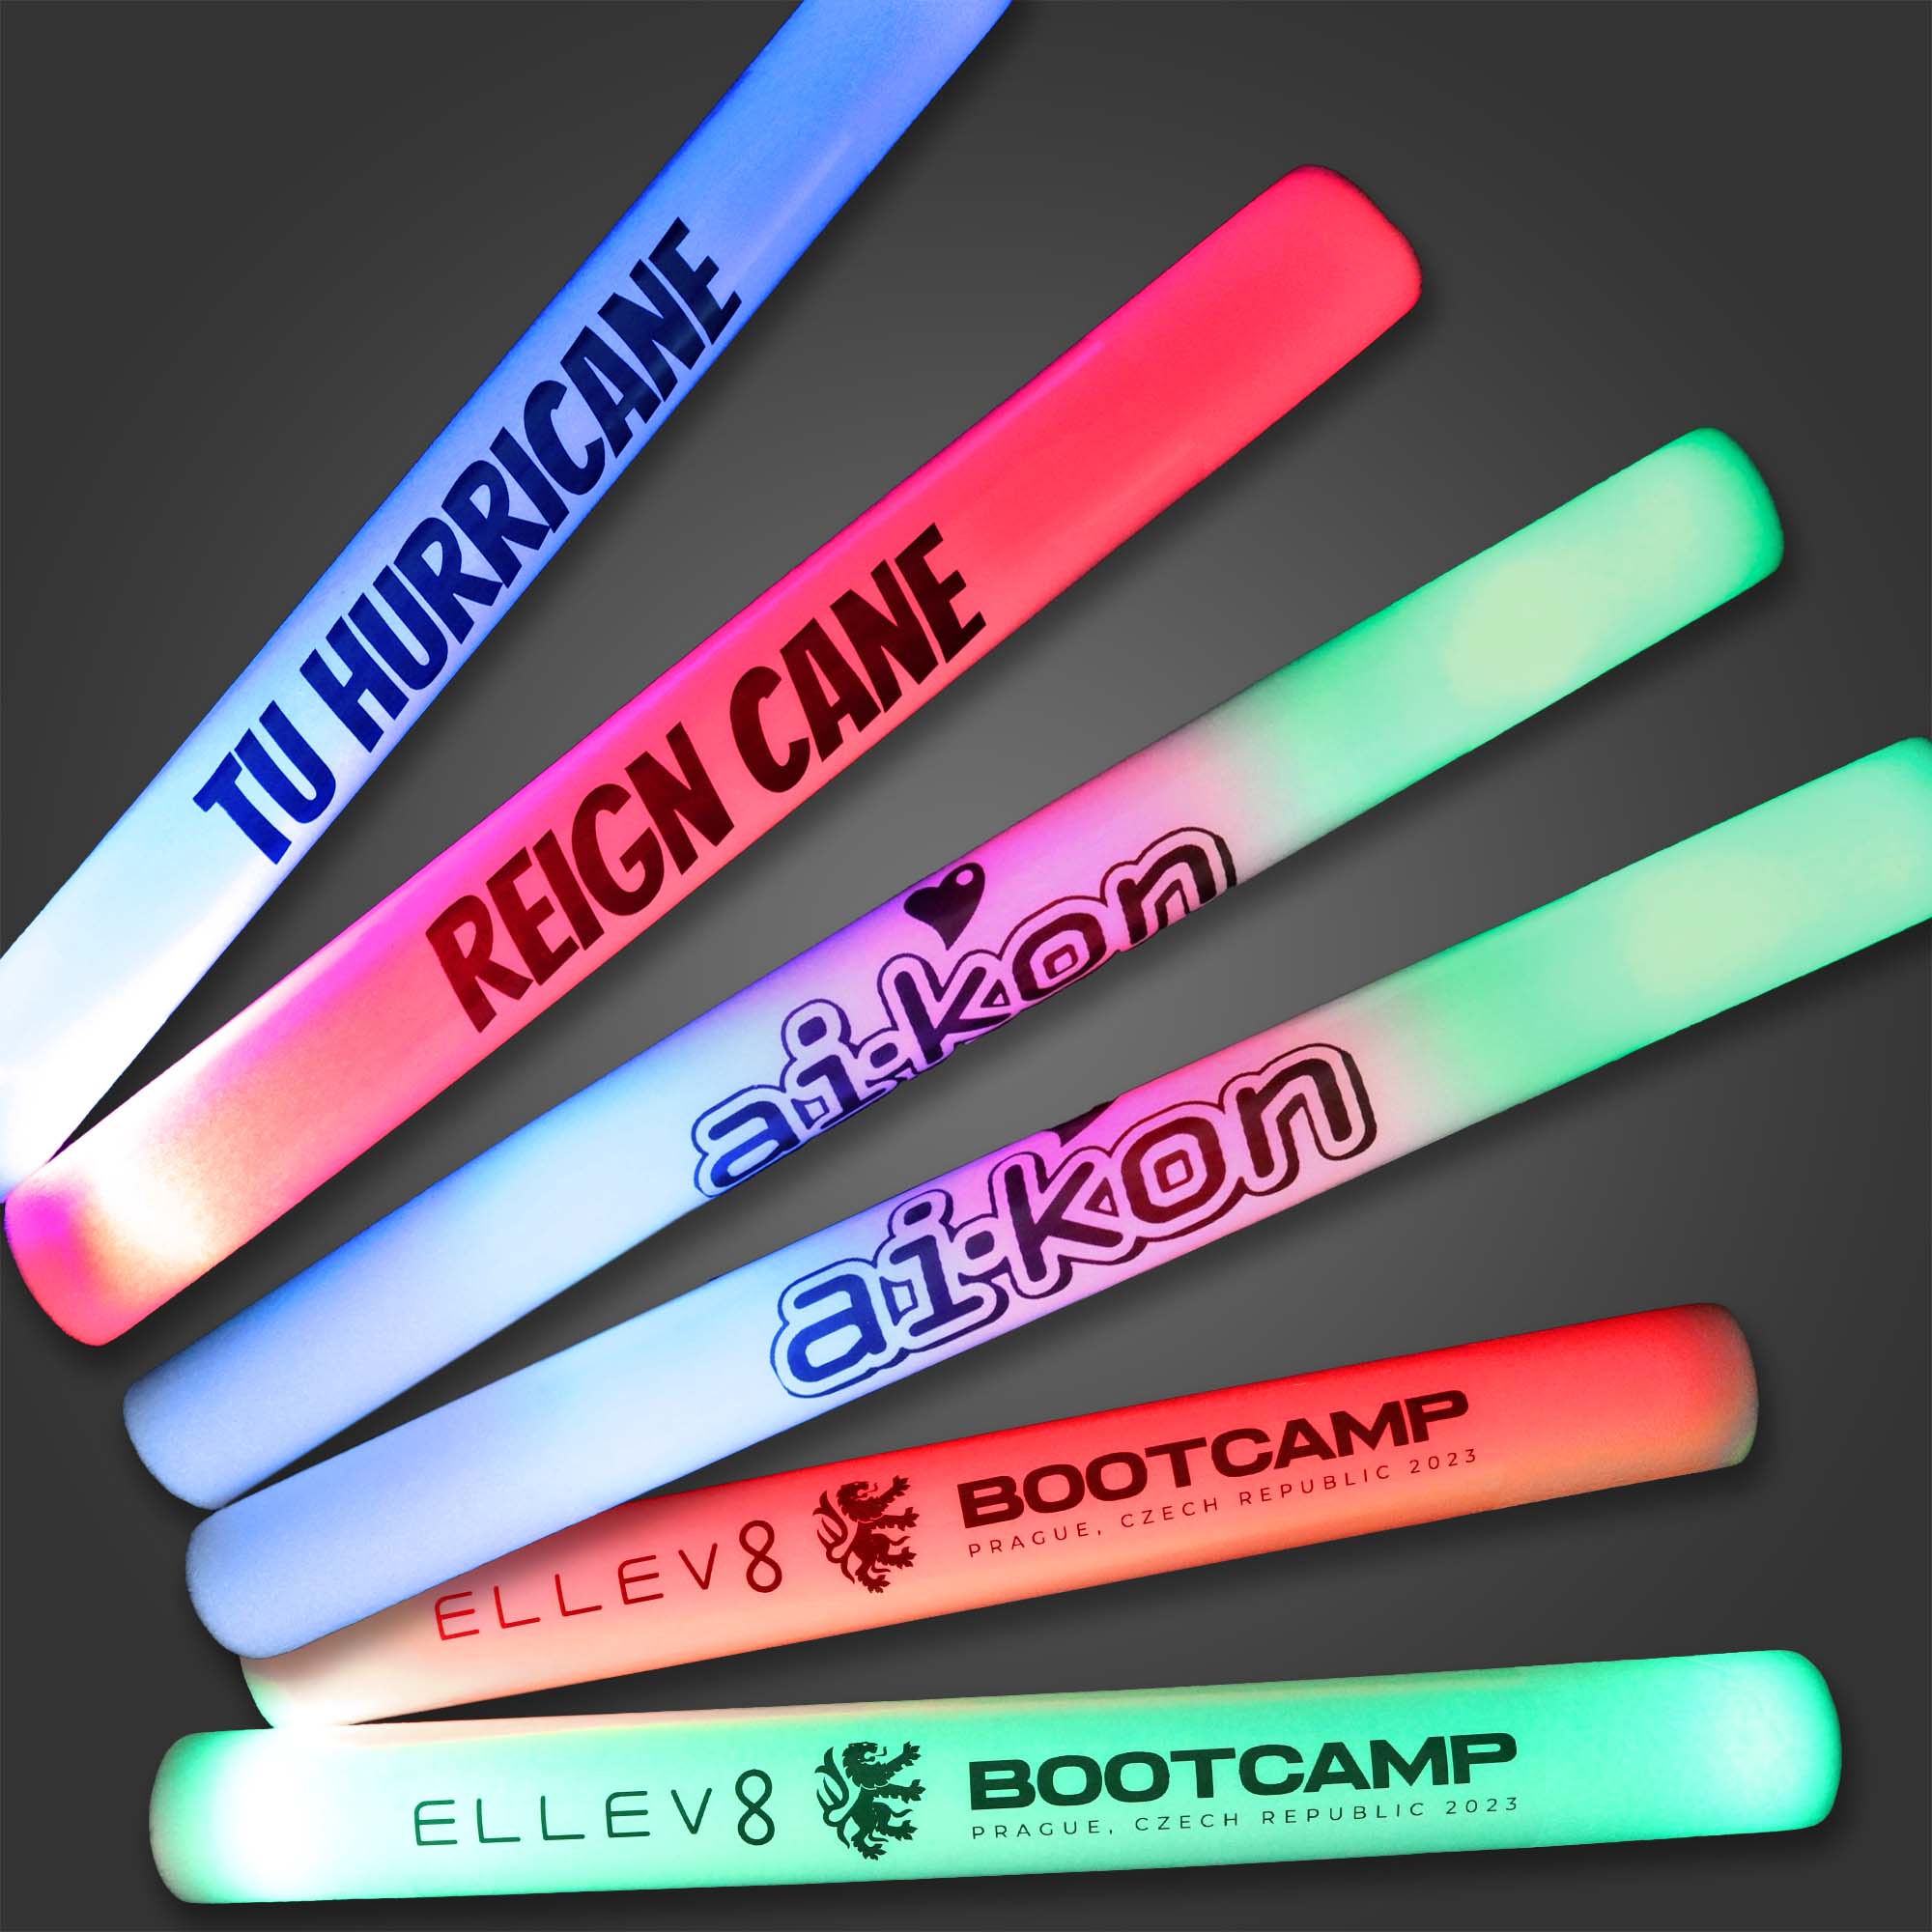 150 Flashing Custom LED Foam Sticks You Pick the Color and the